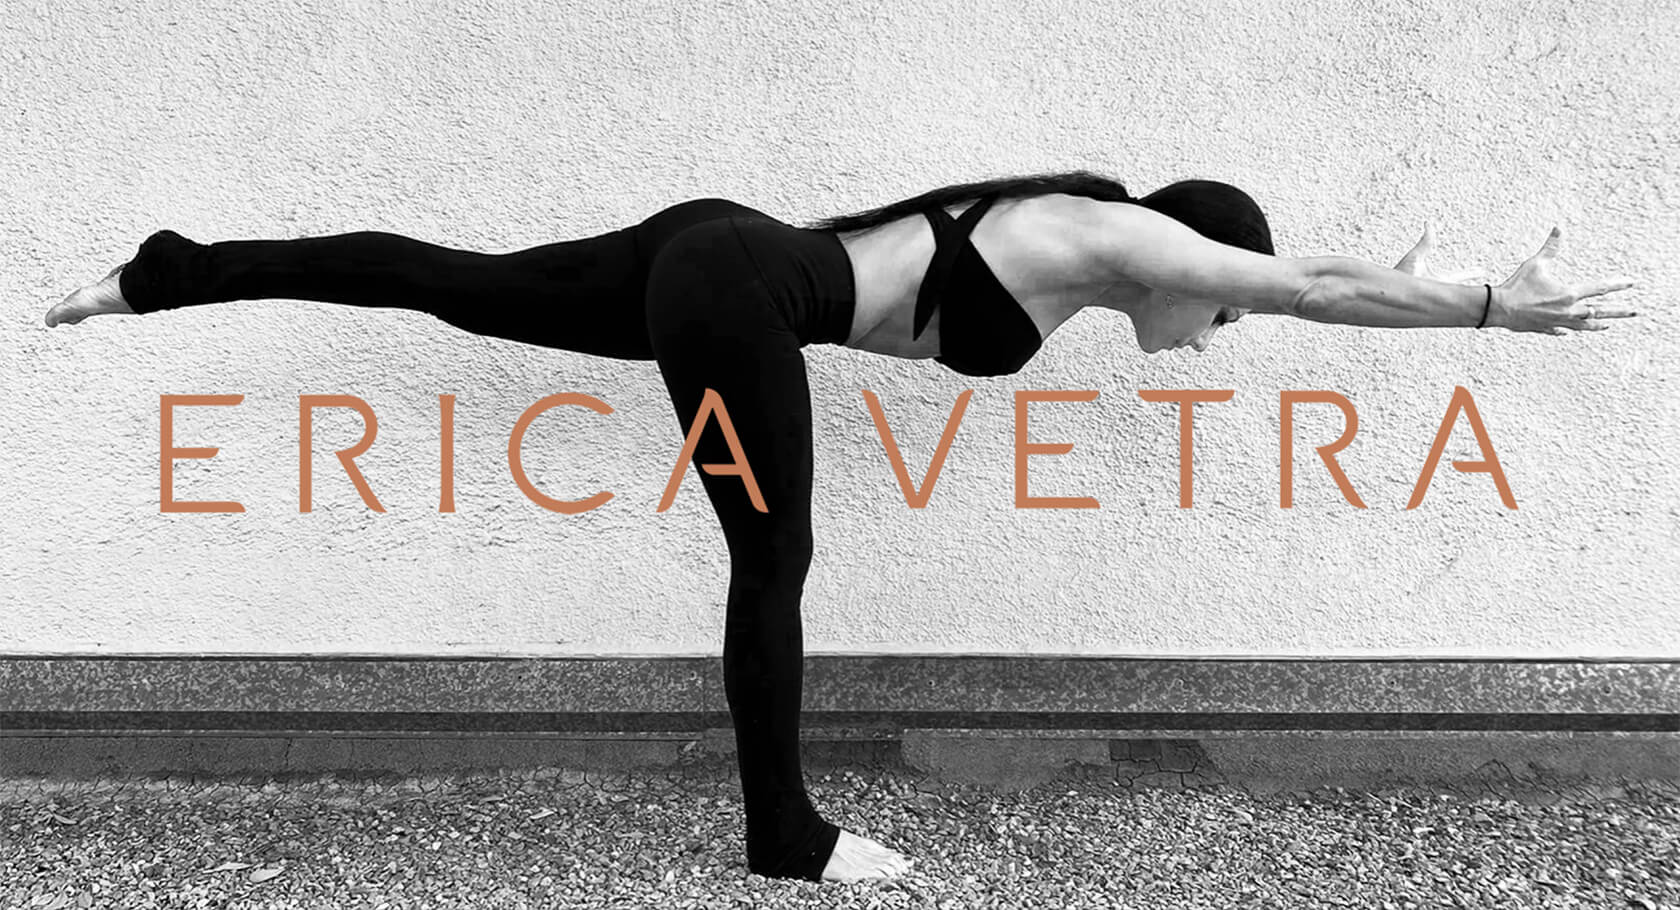 Beginners Yoga For Weight Loss w/ Erica Vetra India